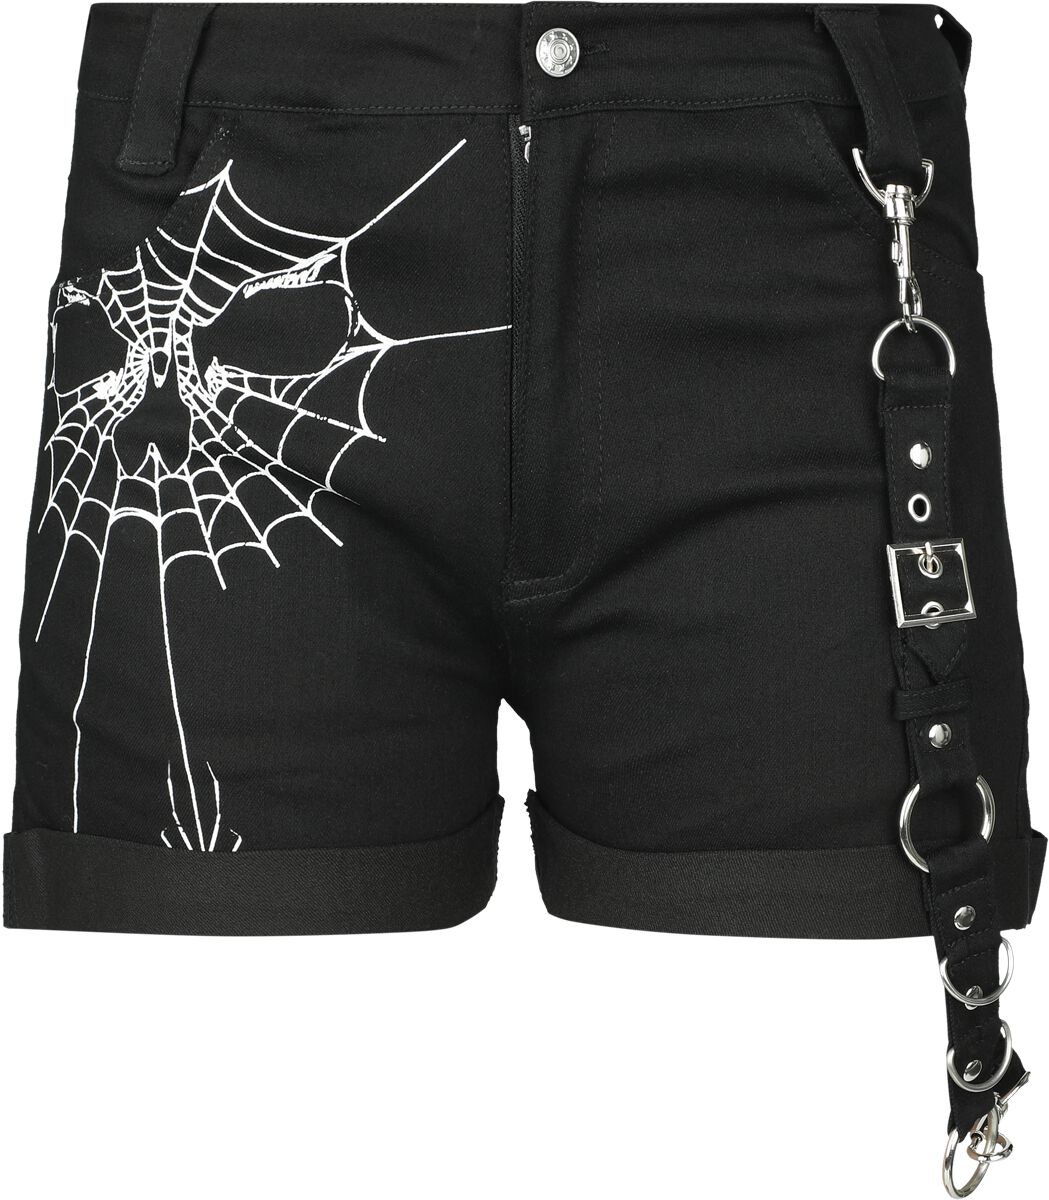 Image of Shorts Gothic di Heartless - widow maker shorts - 28 a 36 - Donna - nero/bianco